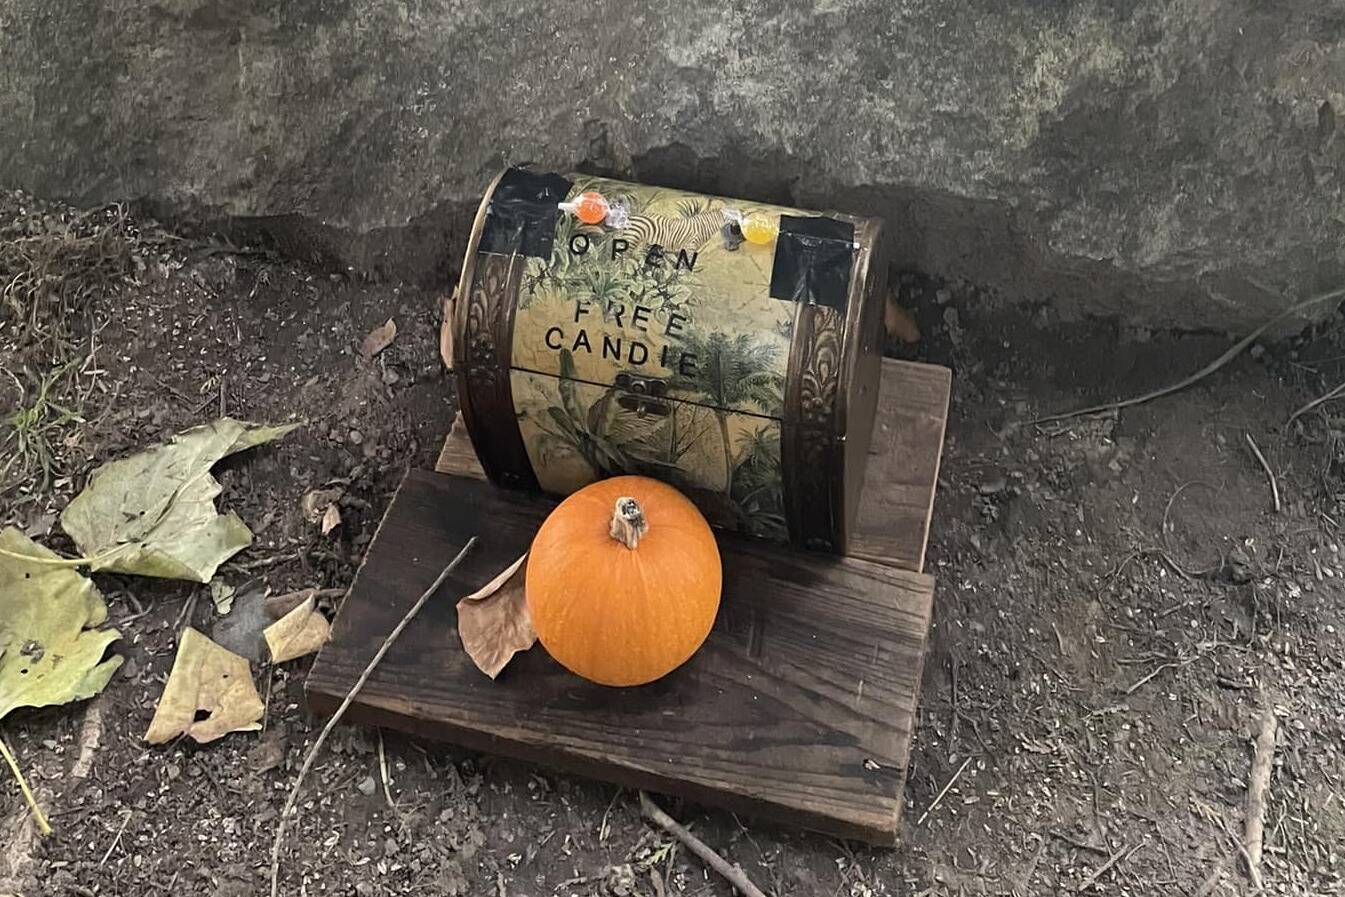 A box marked “Open: free candie” was found on the Mountain View Community Trail, raising some concerns from Agassiz area residents. (Photo/Andra Hachey)